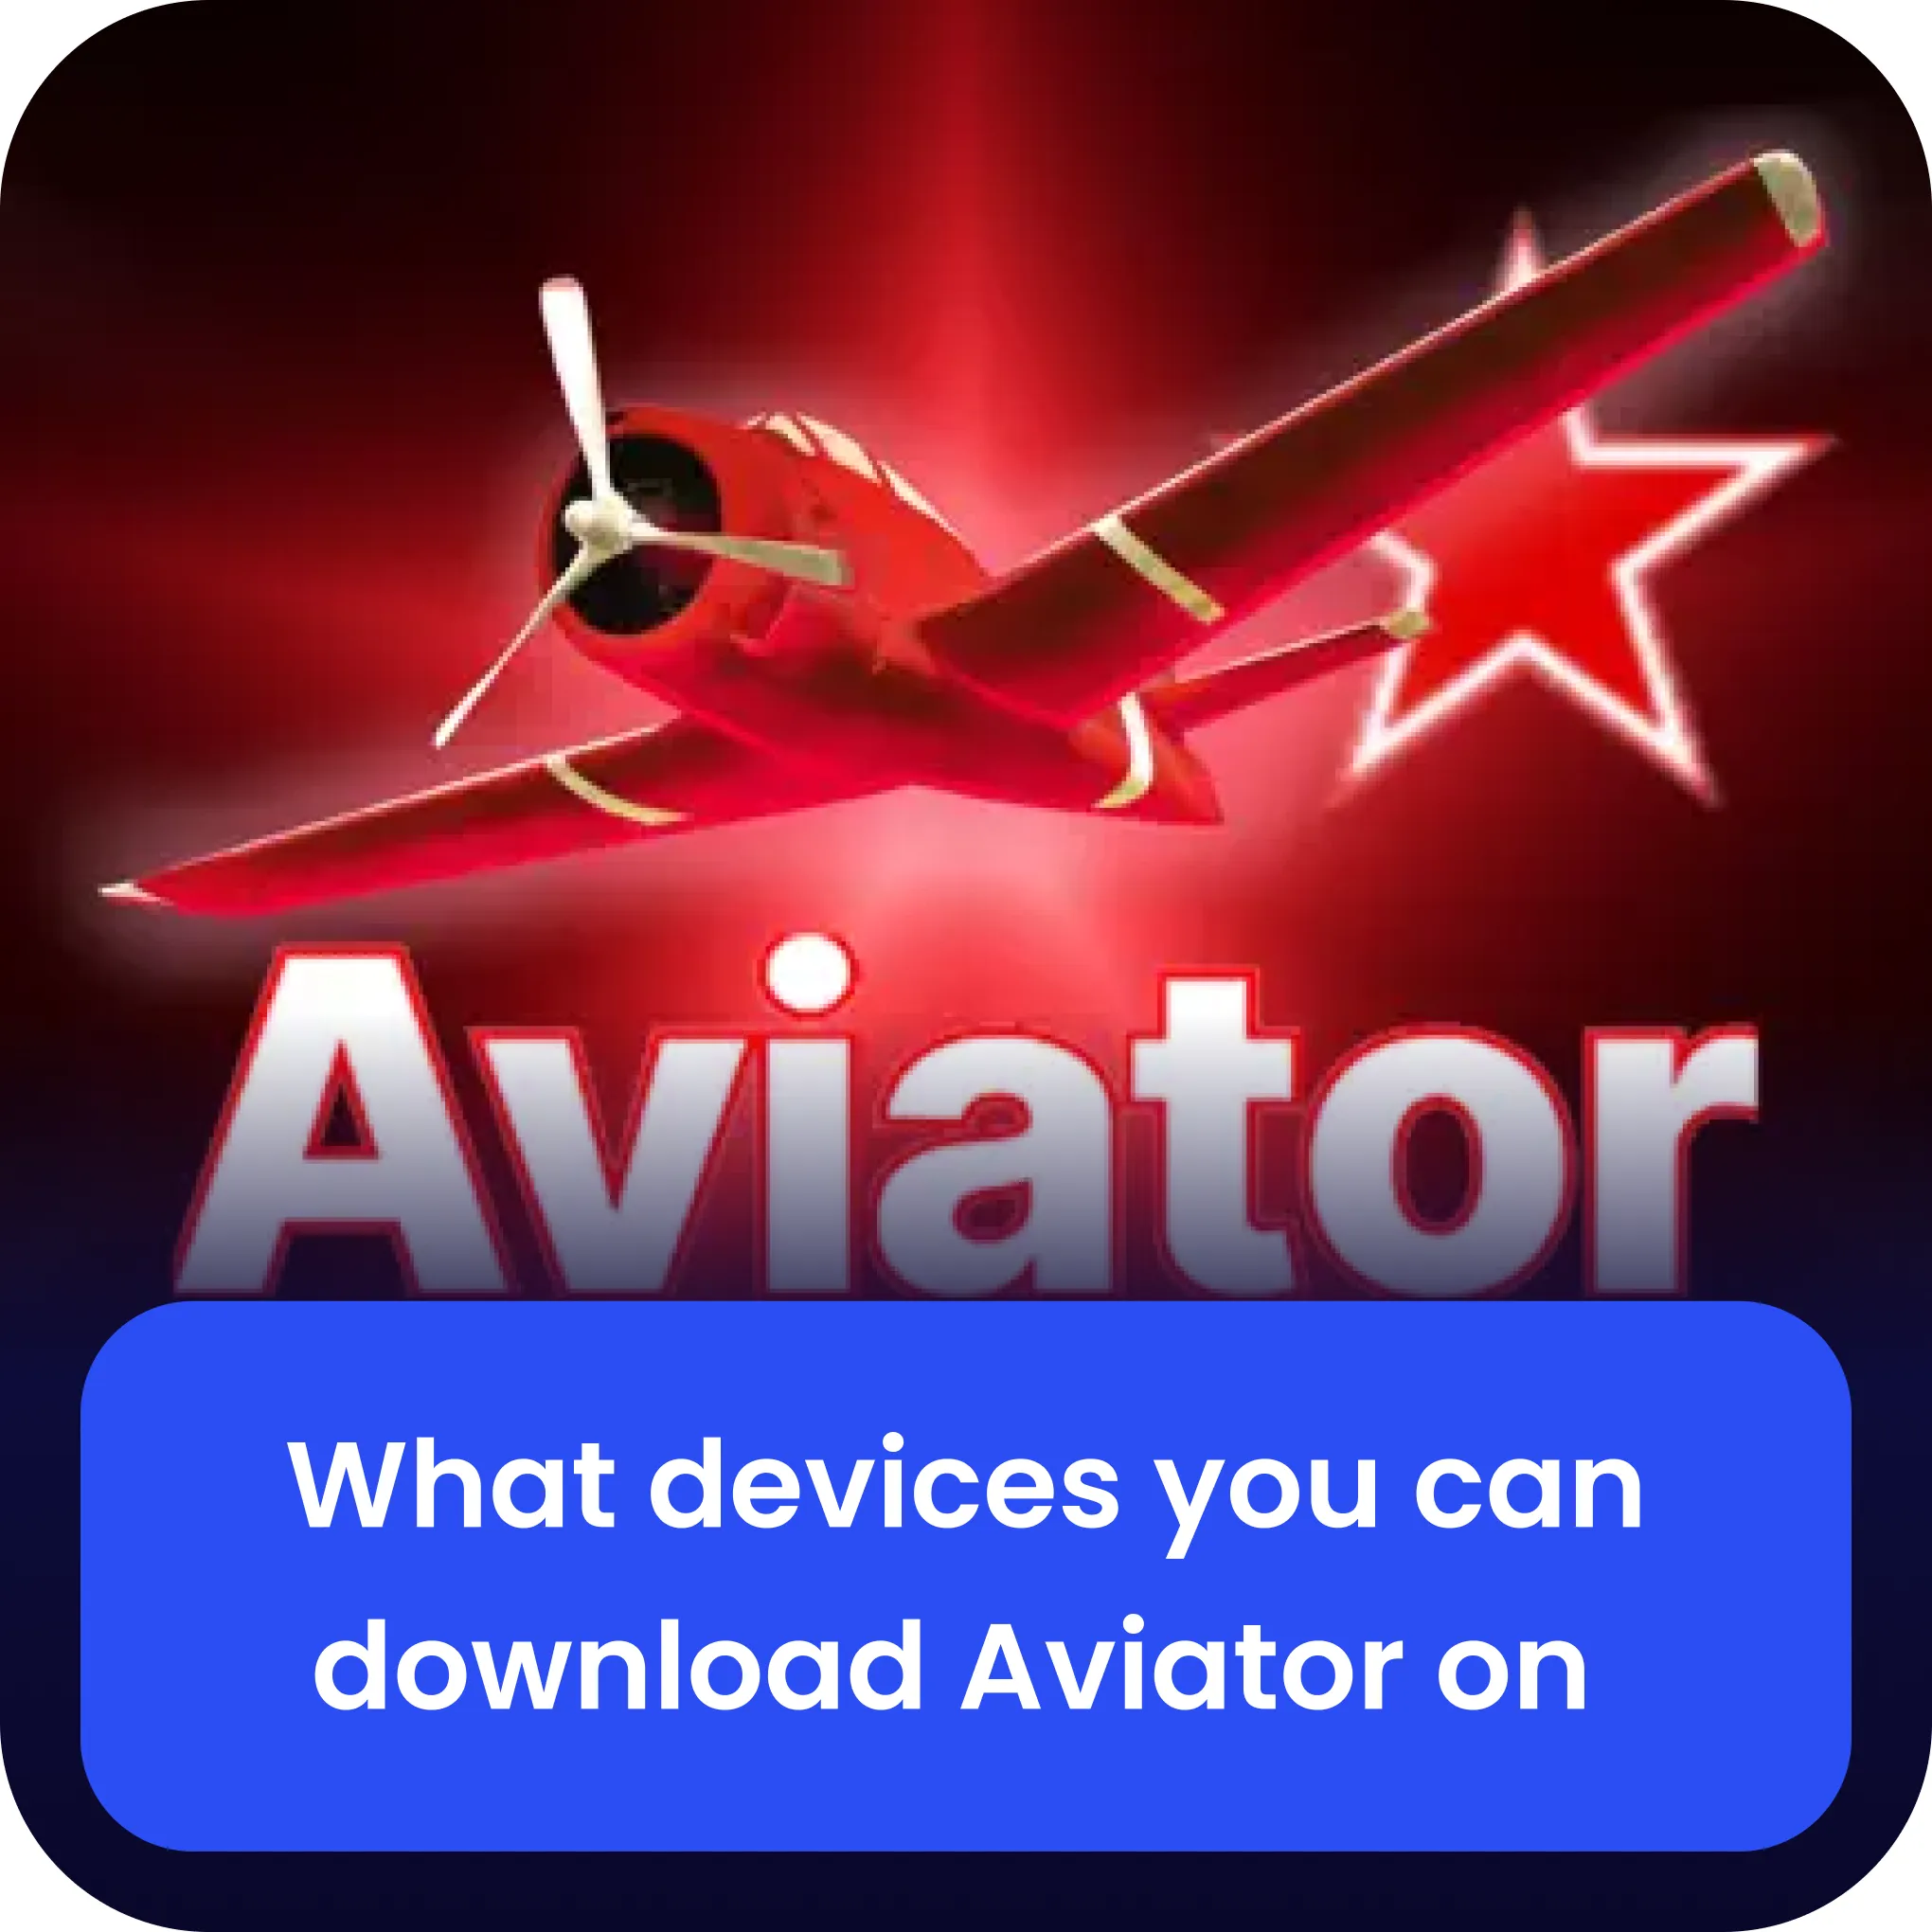 aviator on different devices